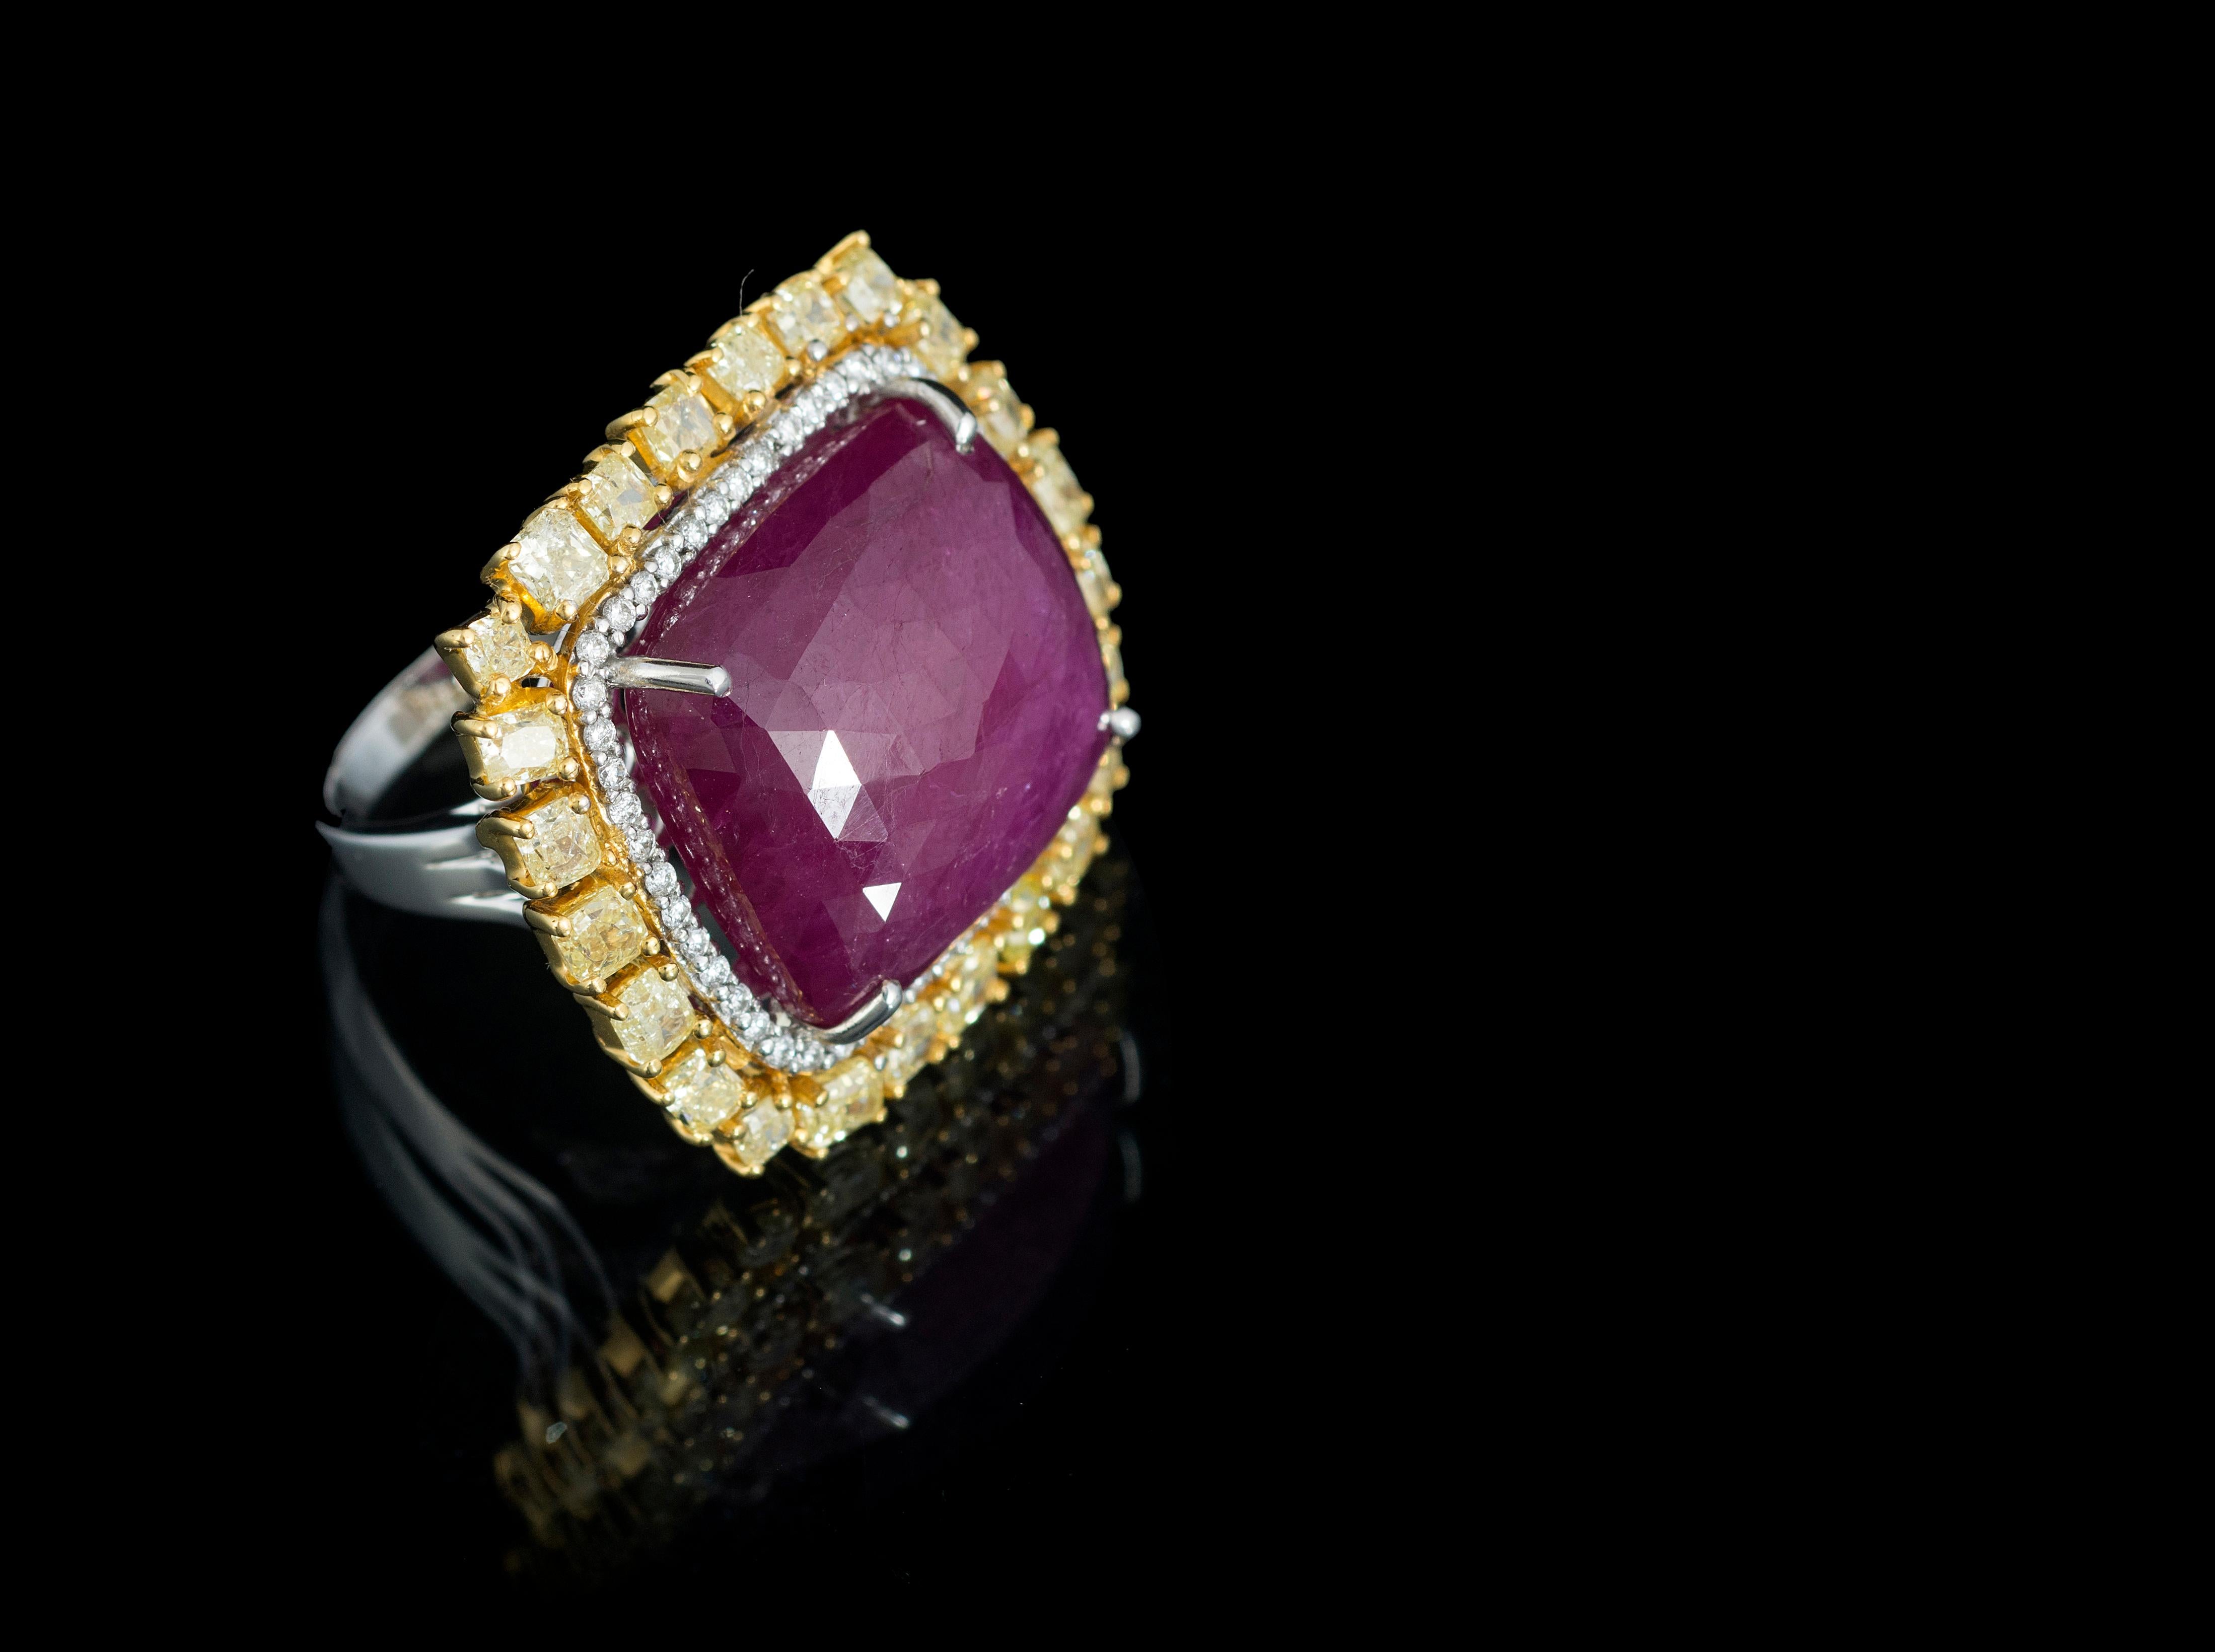 A very gorgeous and attractive cocktail ring set in 18K white gold with Ruby and Yellow Diamonds. The weight of the faceted Ruby 34.82 carats. The Ruby is completely natural, without any treatment and is of Mozambique origin. The combined weight of